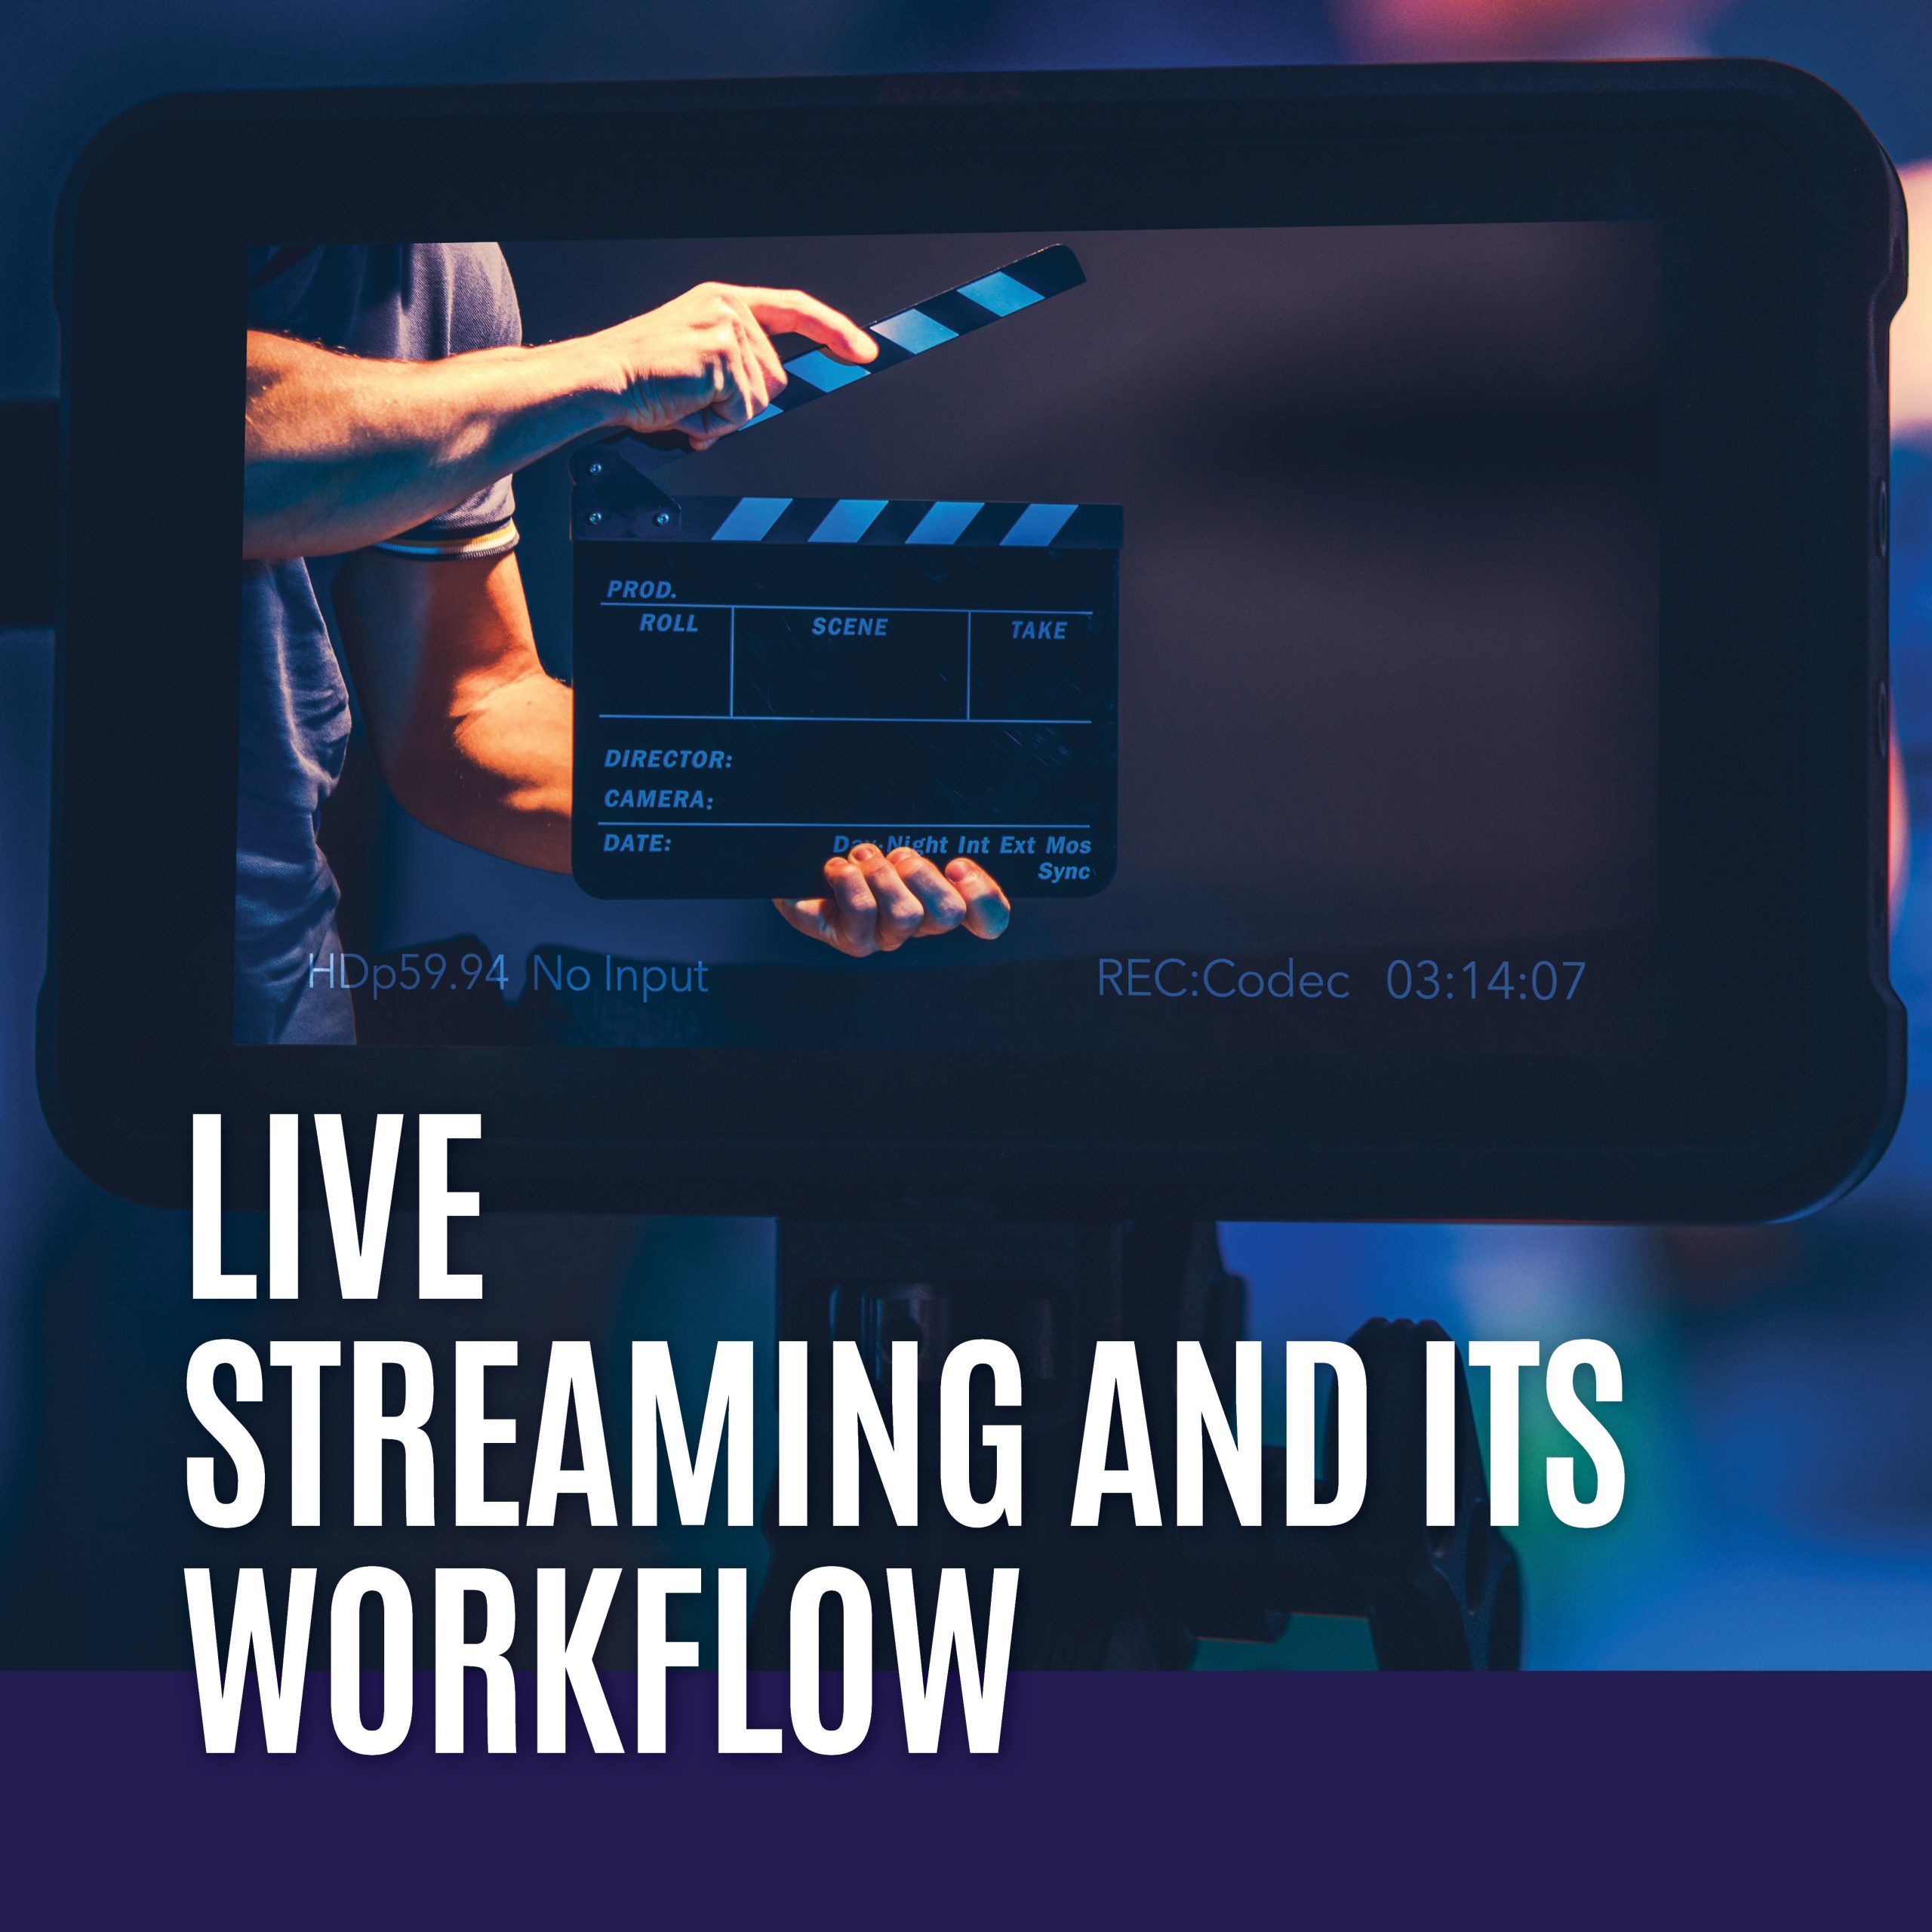 Live Streaming And Its Workflow